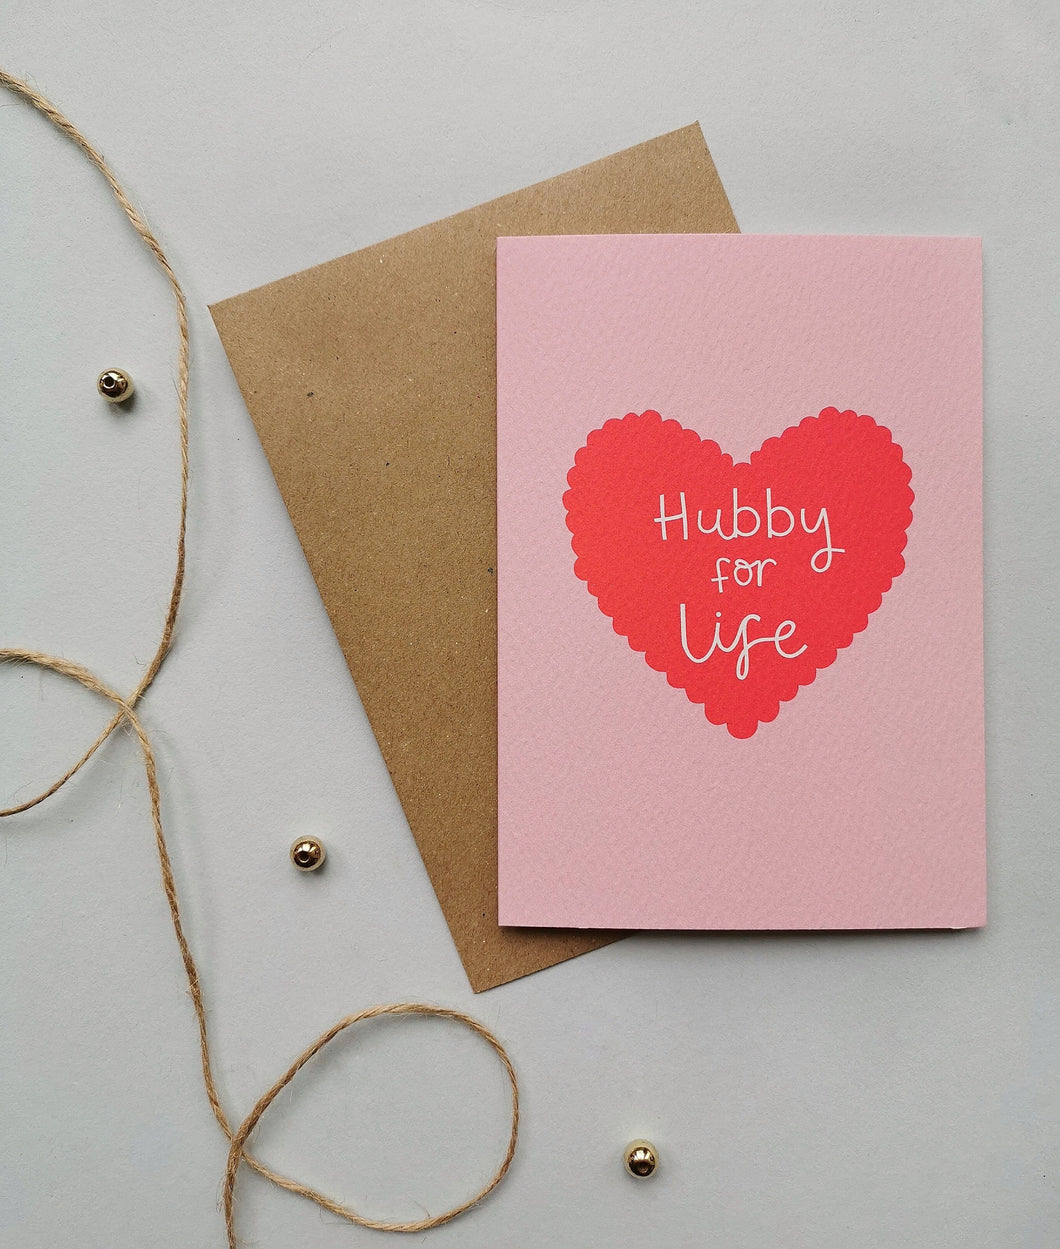 Hubby for Life Card Stationery Helen Richmond 